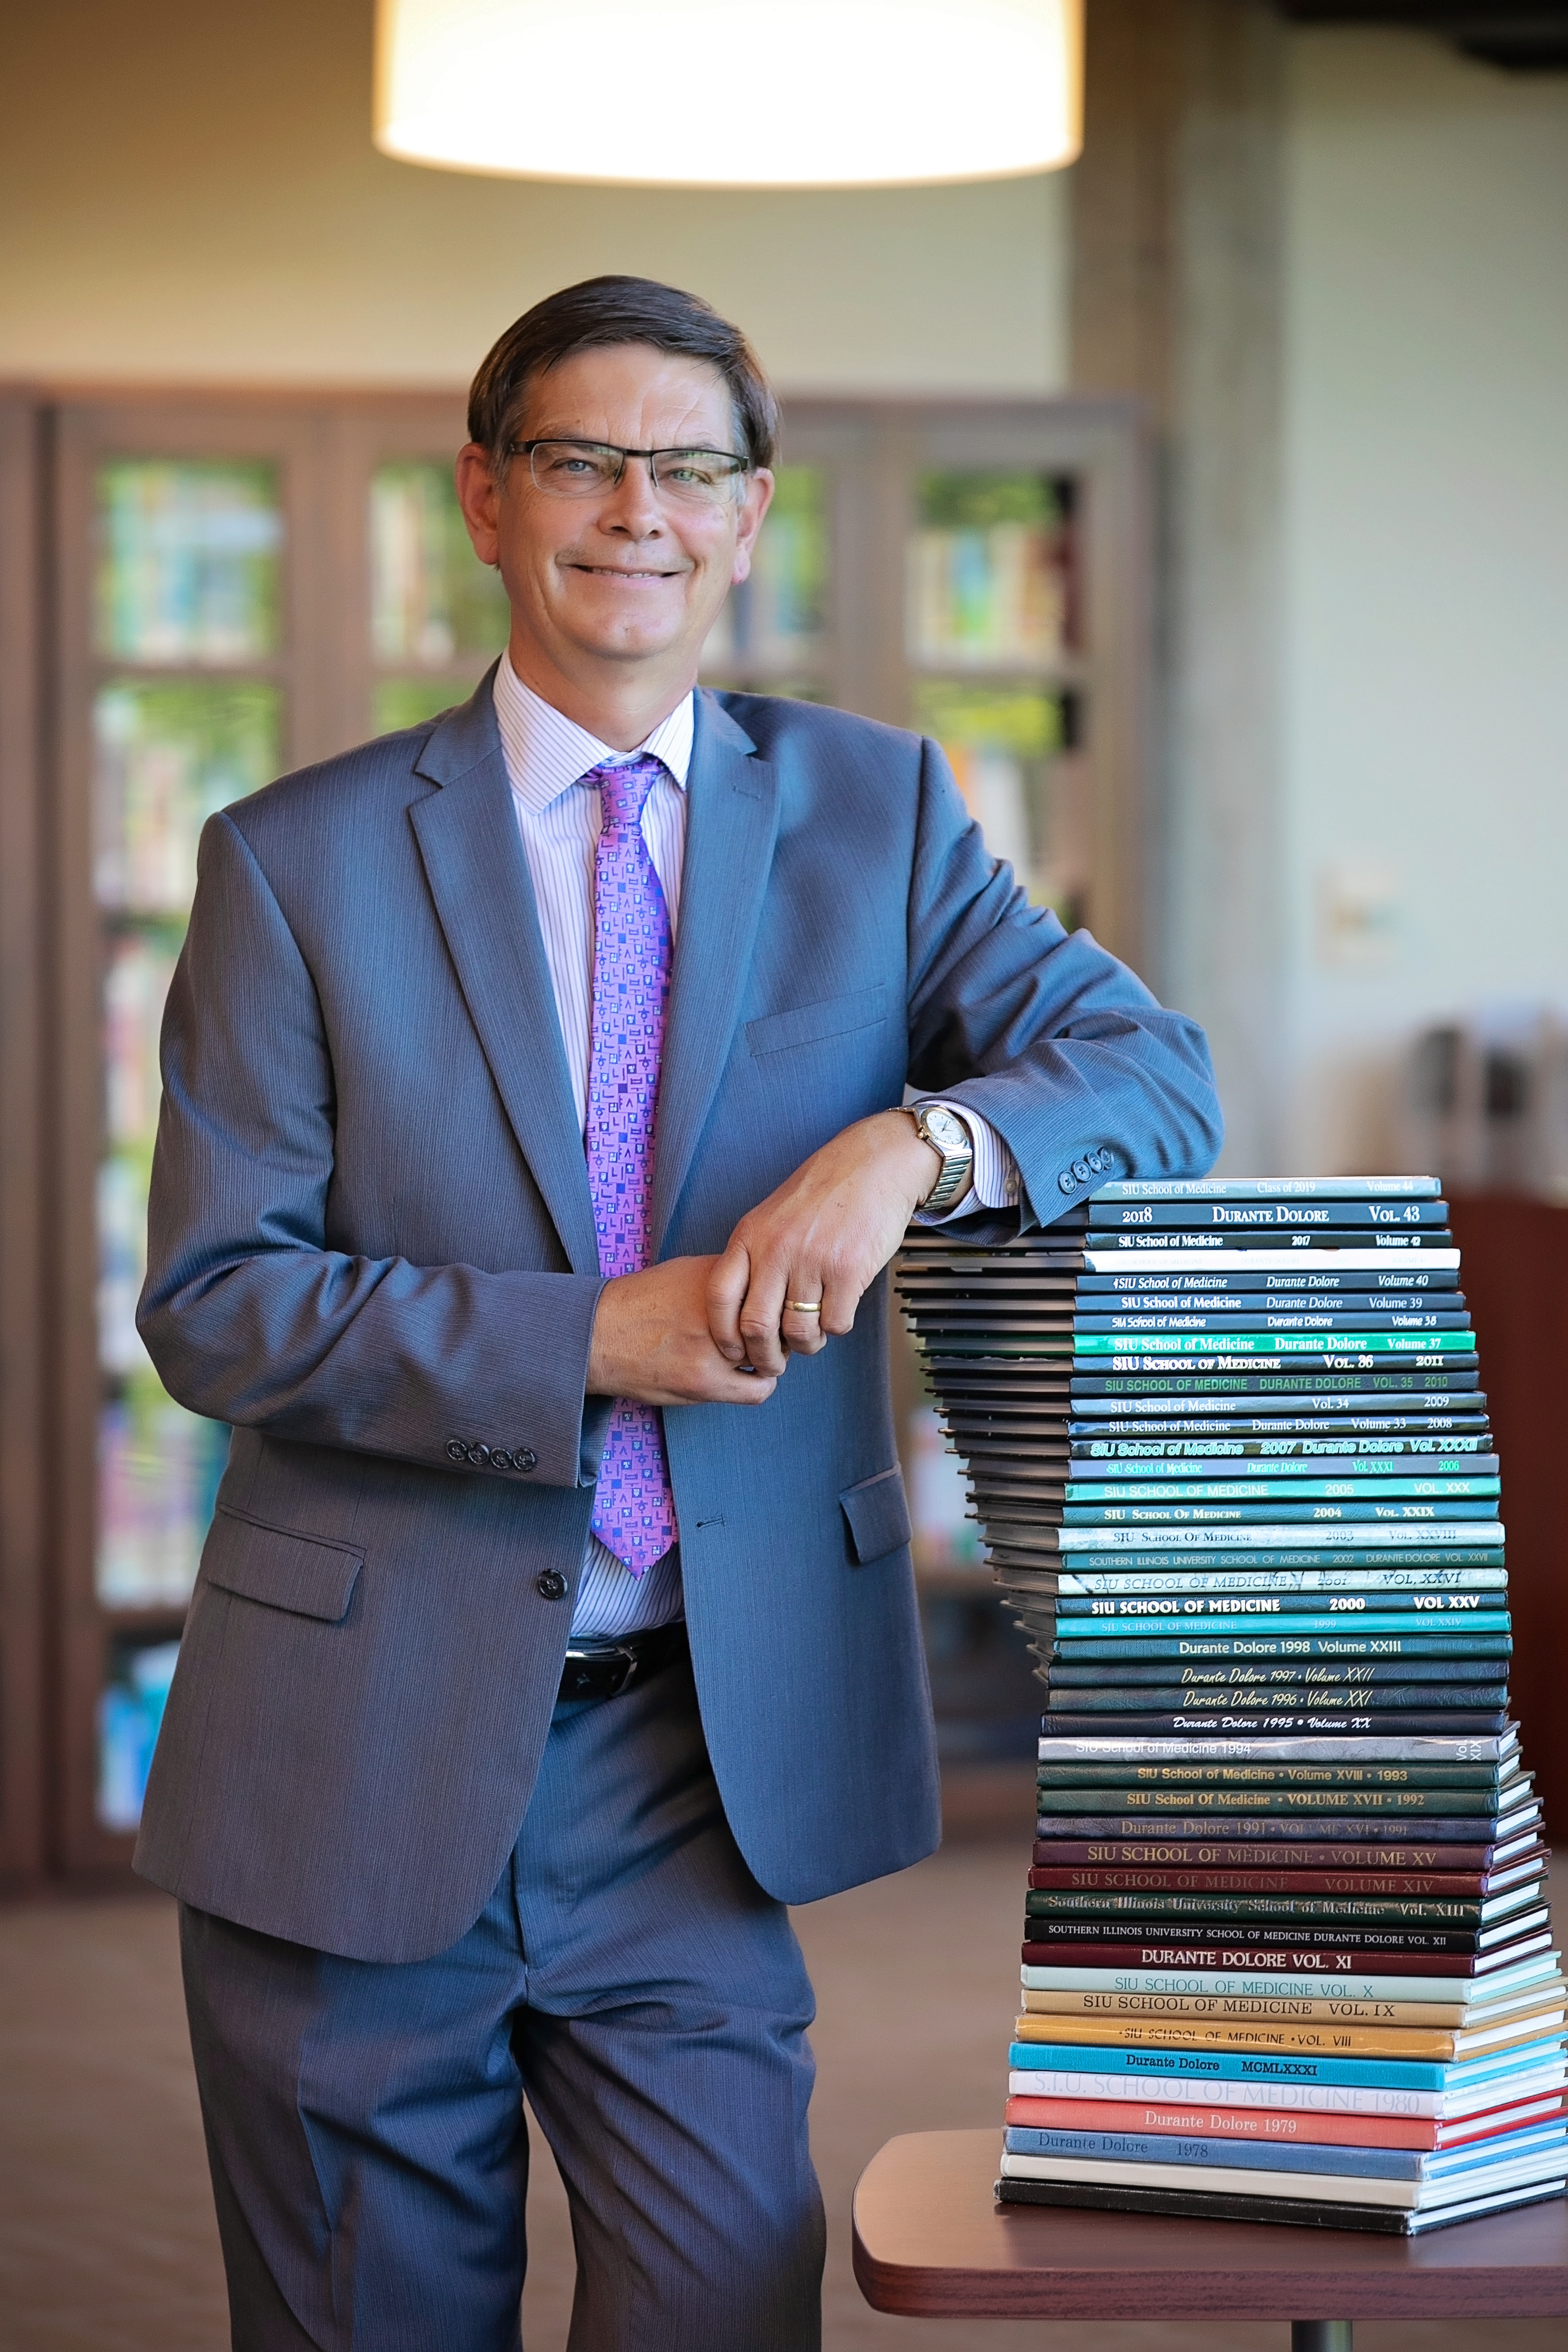 Dr. Kruse with yearbooks